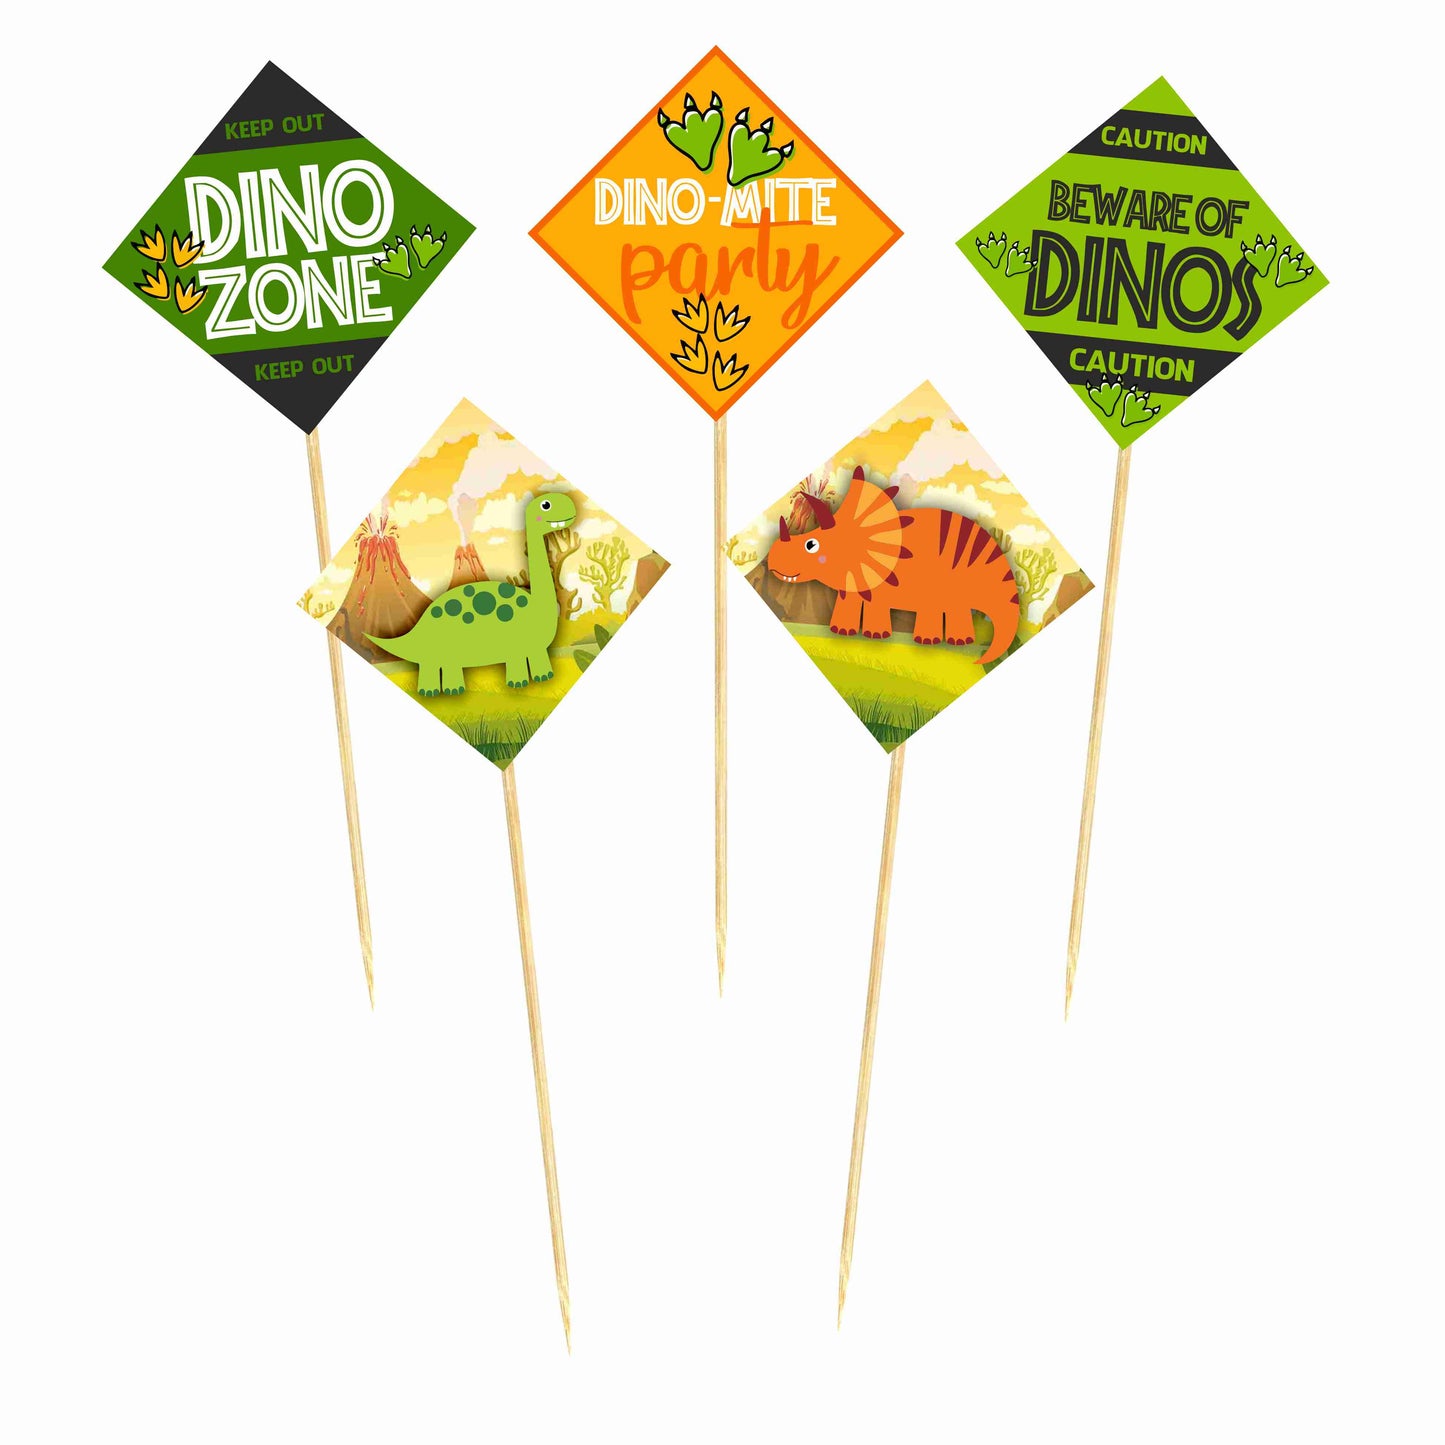 Dinosaur Theme Cake Topper Pack of 10 Nos for Birthday Cake Decoration Theme Party Item For Boys Girls Adults Birthday Theme Decor